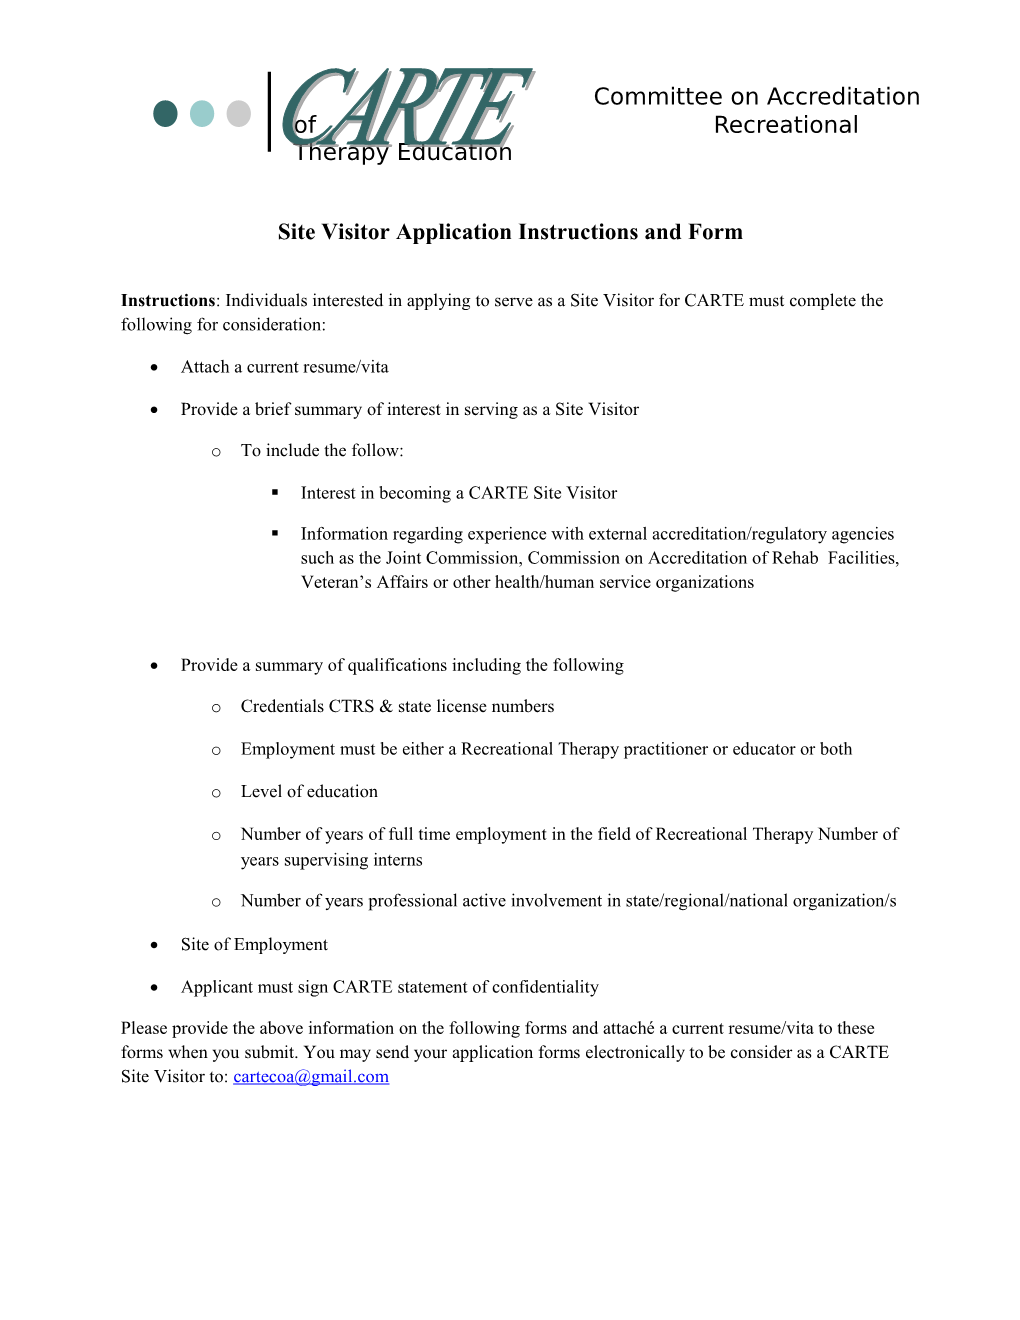 Site Visitor Application Instructions and Form